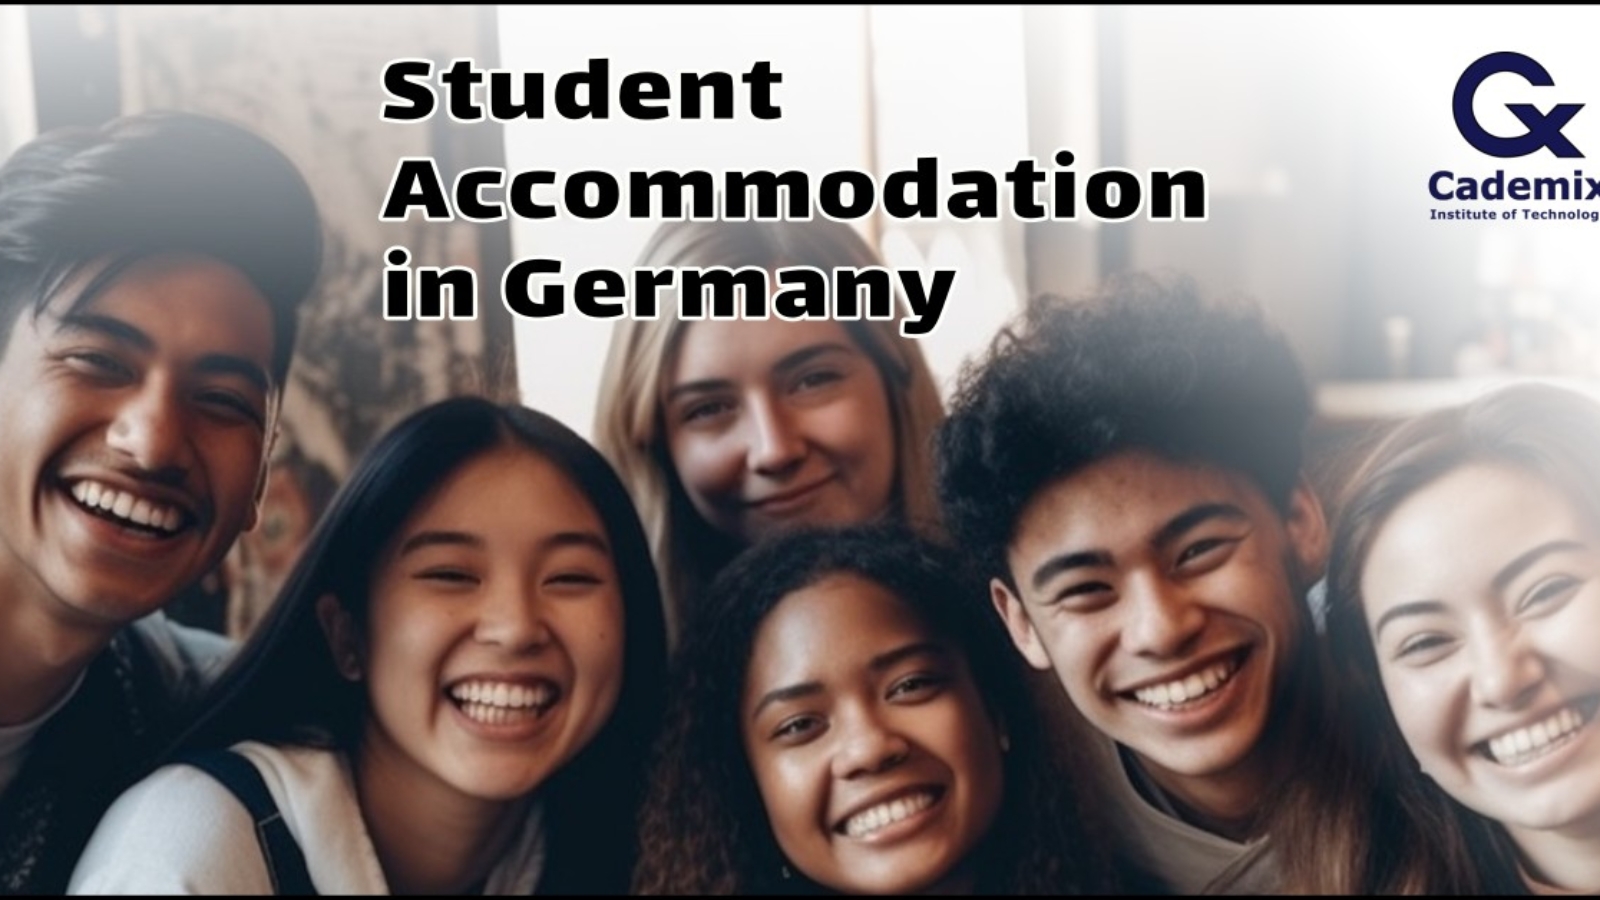 Student Accommodation in Germany